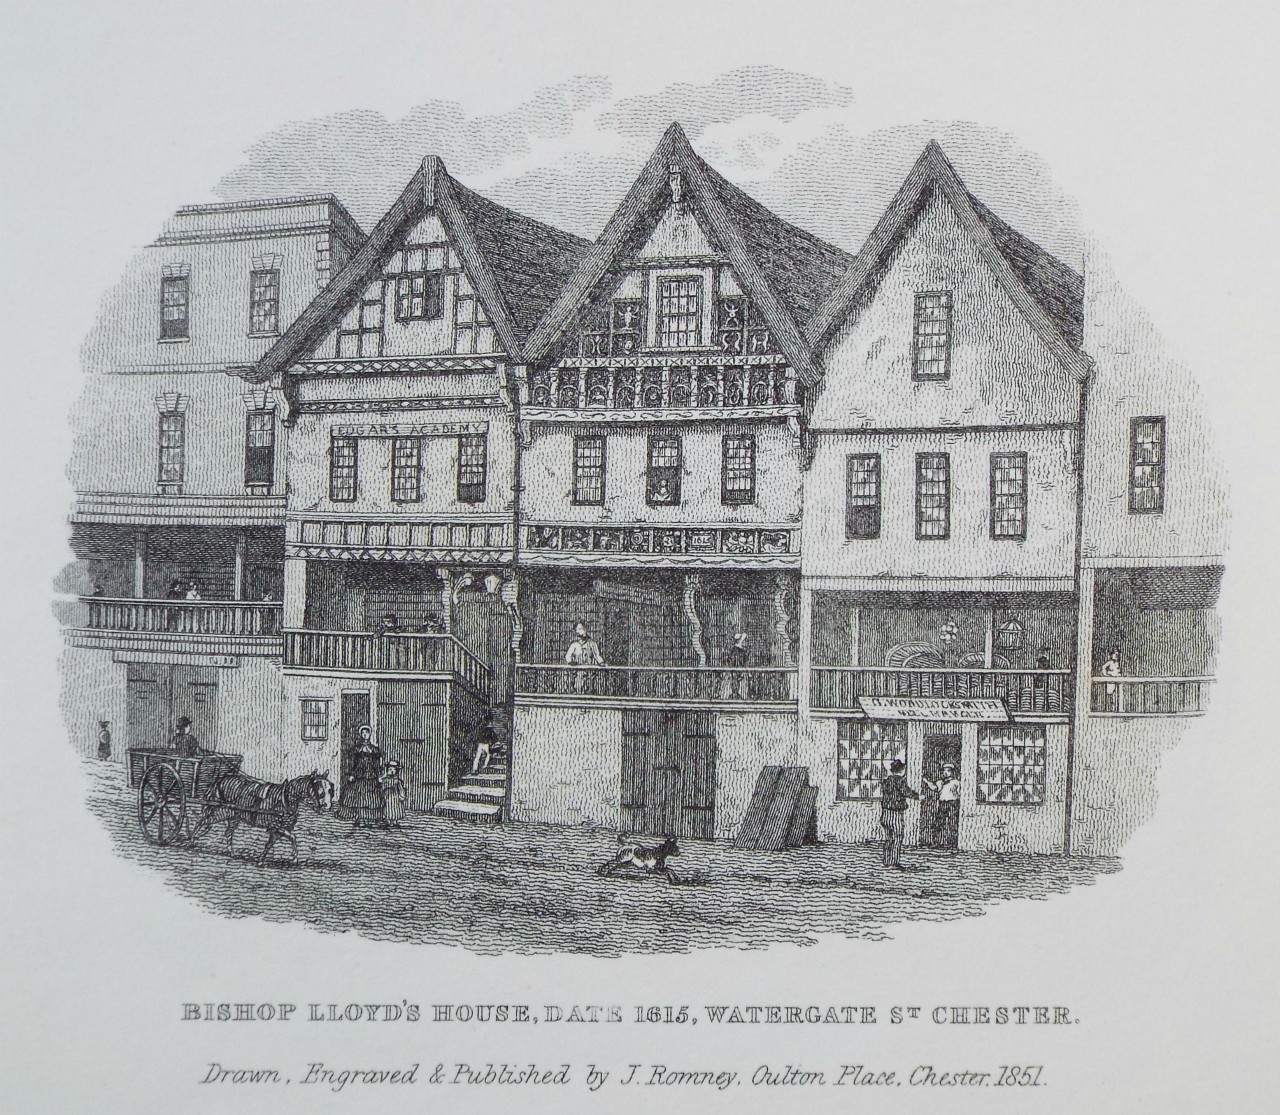 Print - Bishop Lloyd's House, Date 1615, Watergate St. Chester. - Romney